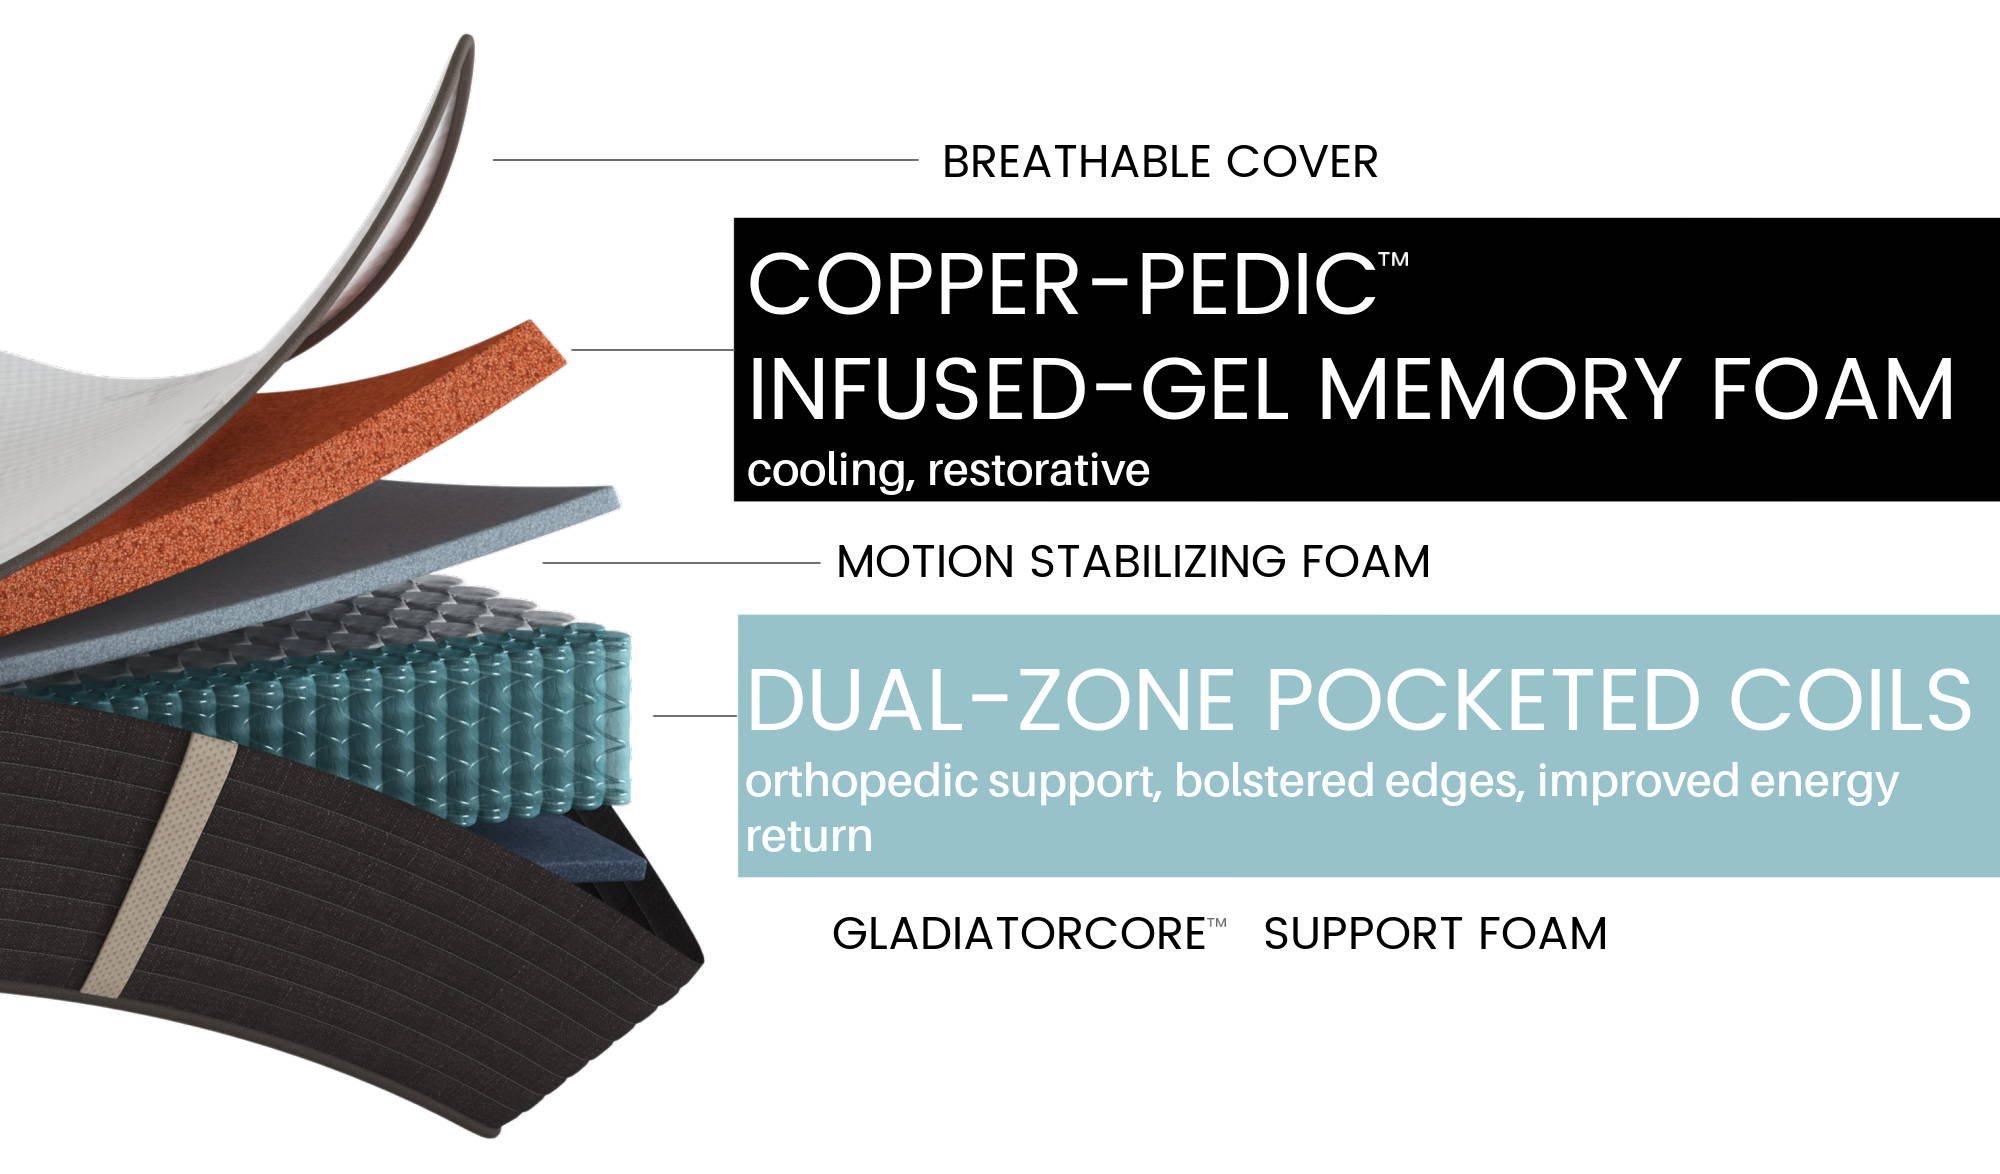 Open hybrid mattress with layers showing: soft organic cotton fabric, copper-infused cooling memory foam, motion stabilizing foam, dual-zone coils with bolstered sides, support foam made from plant-based GladiatorCore foam.